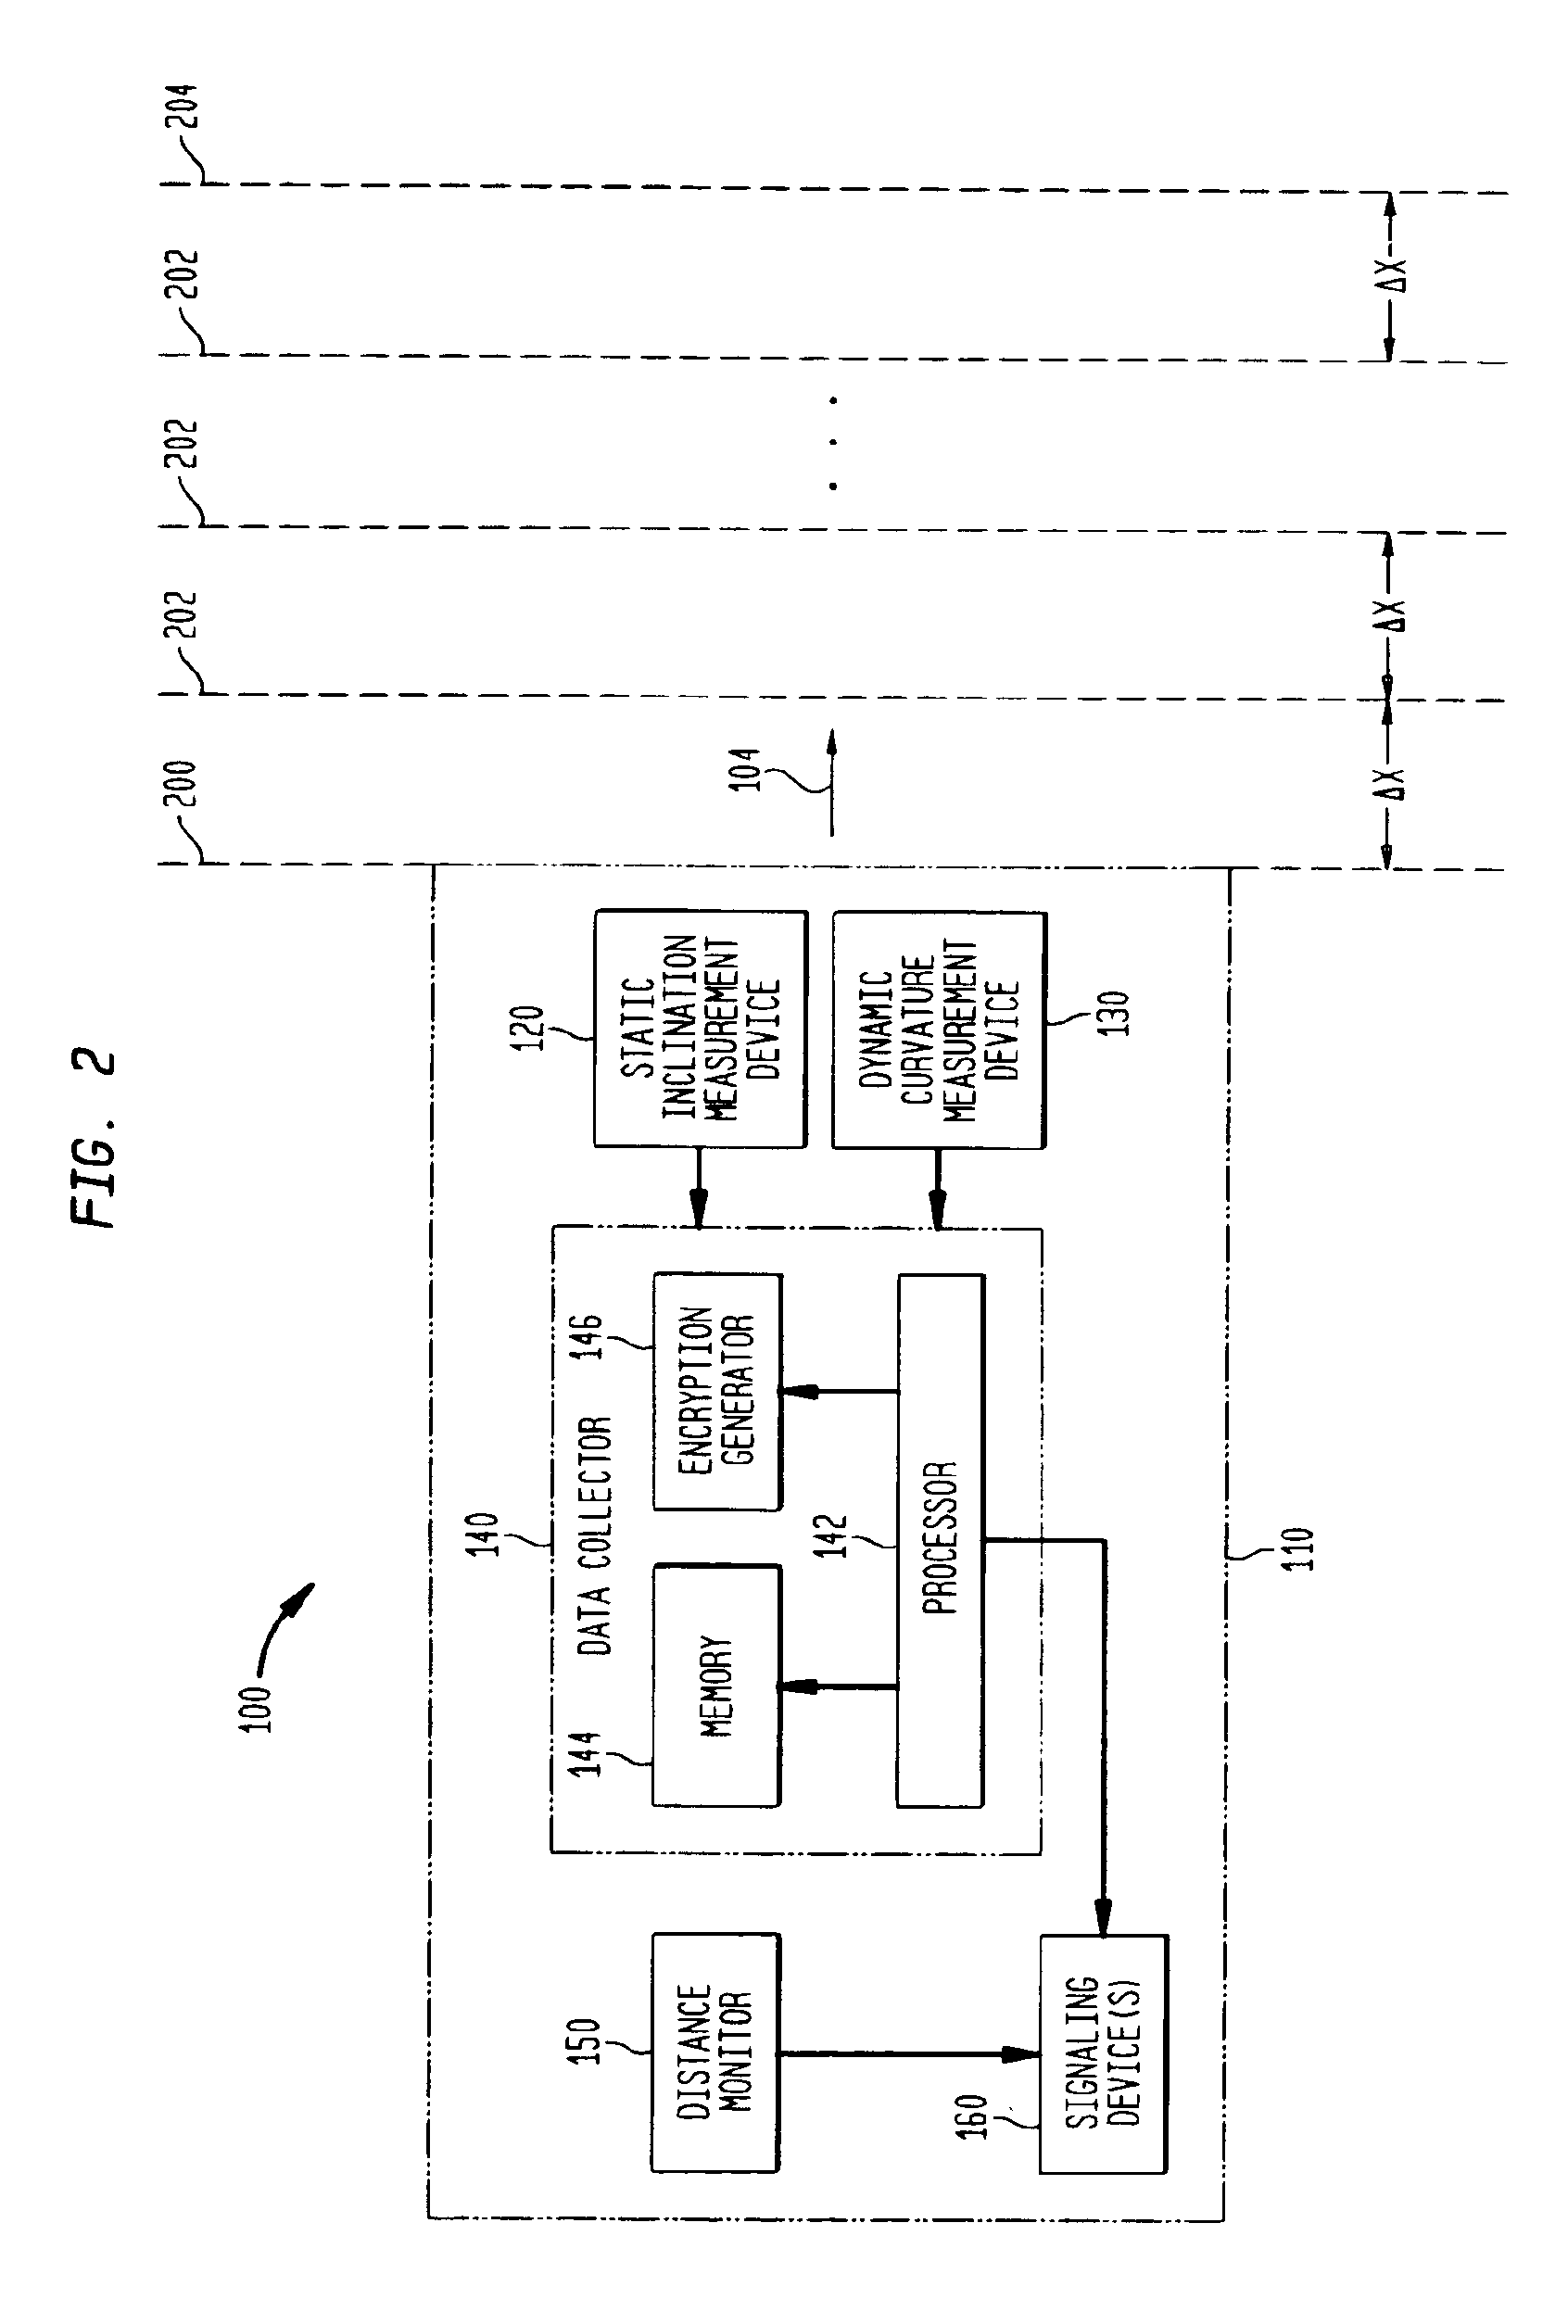 System for collecting data used by surface profiling scheme